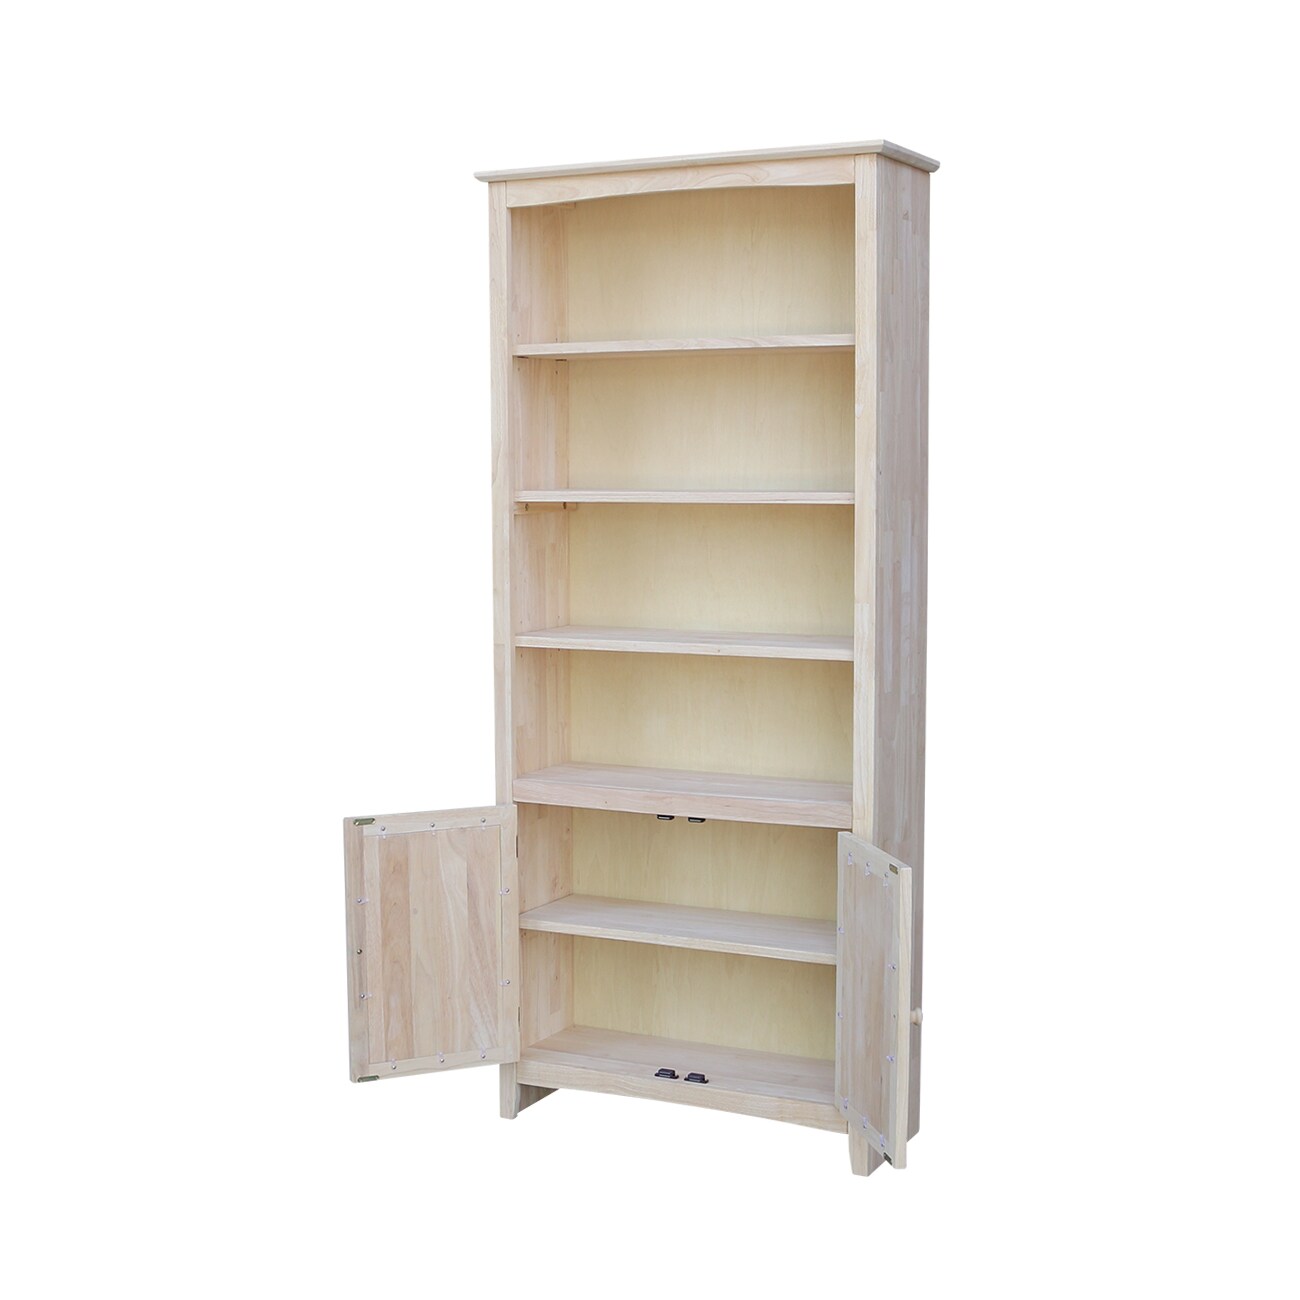 Acrylic Bookshelf 72t X 32w X 12d custom Sizing Never a Problem Hand  Crafted in the U.S. 